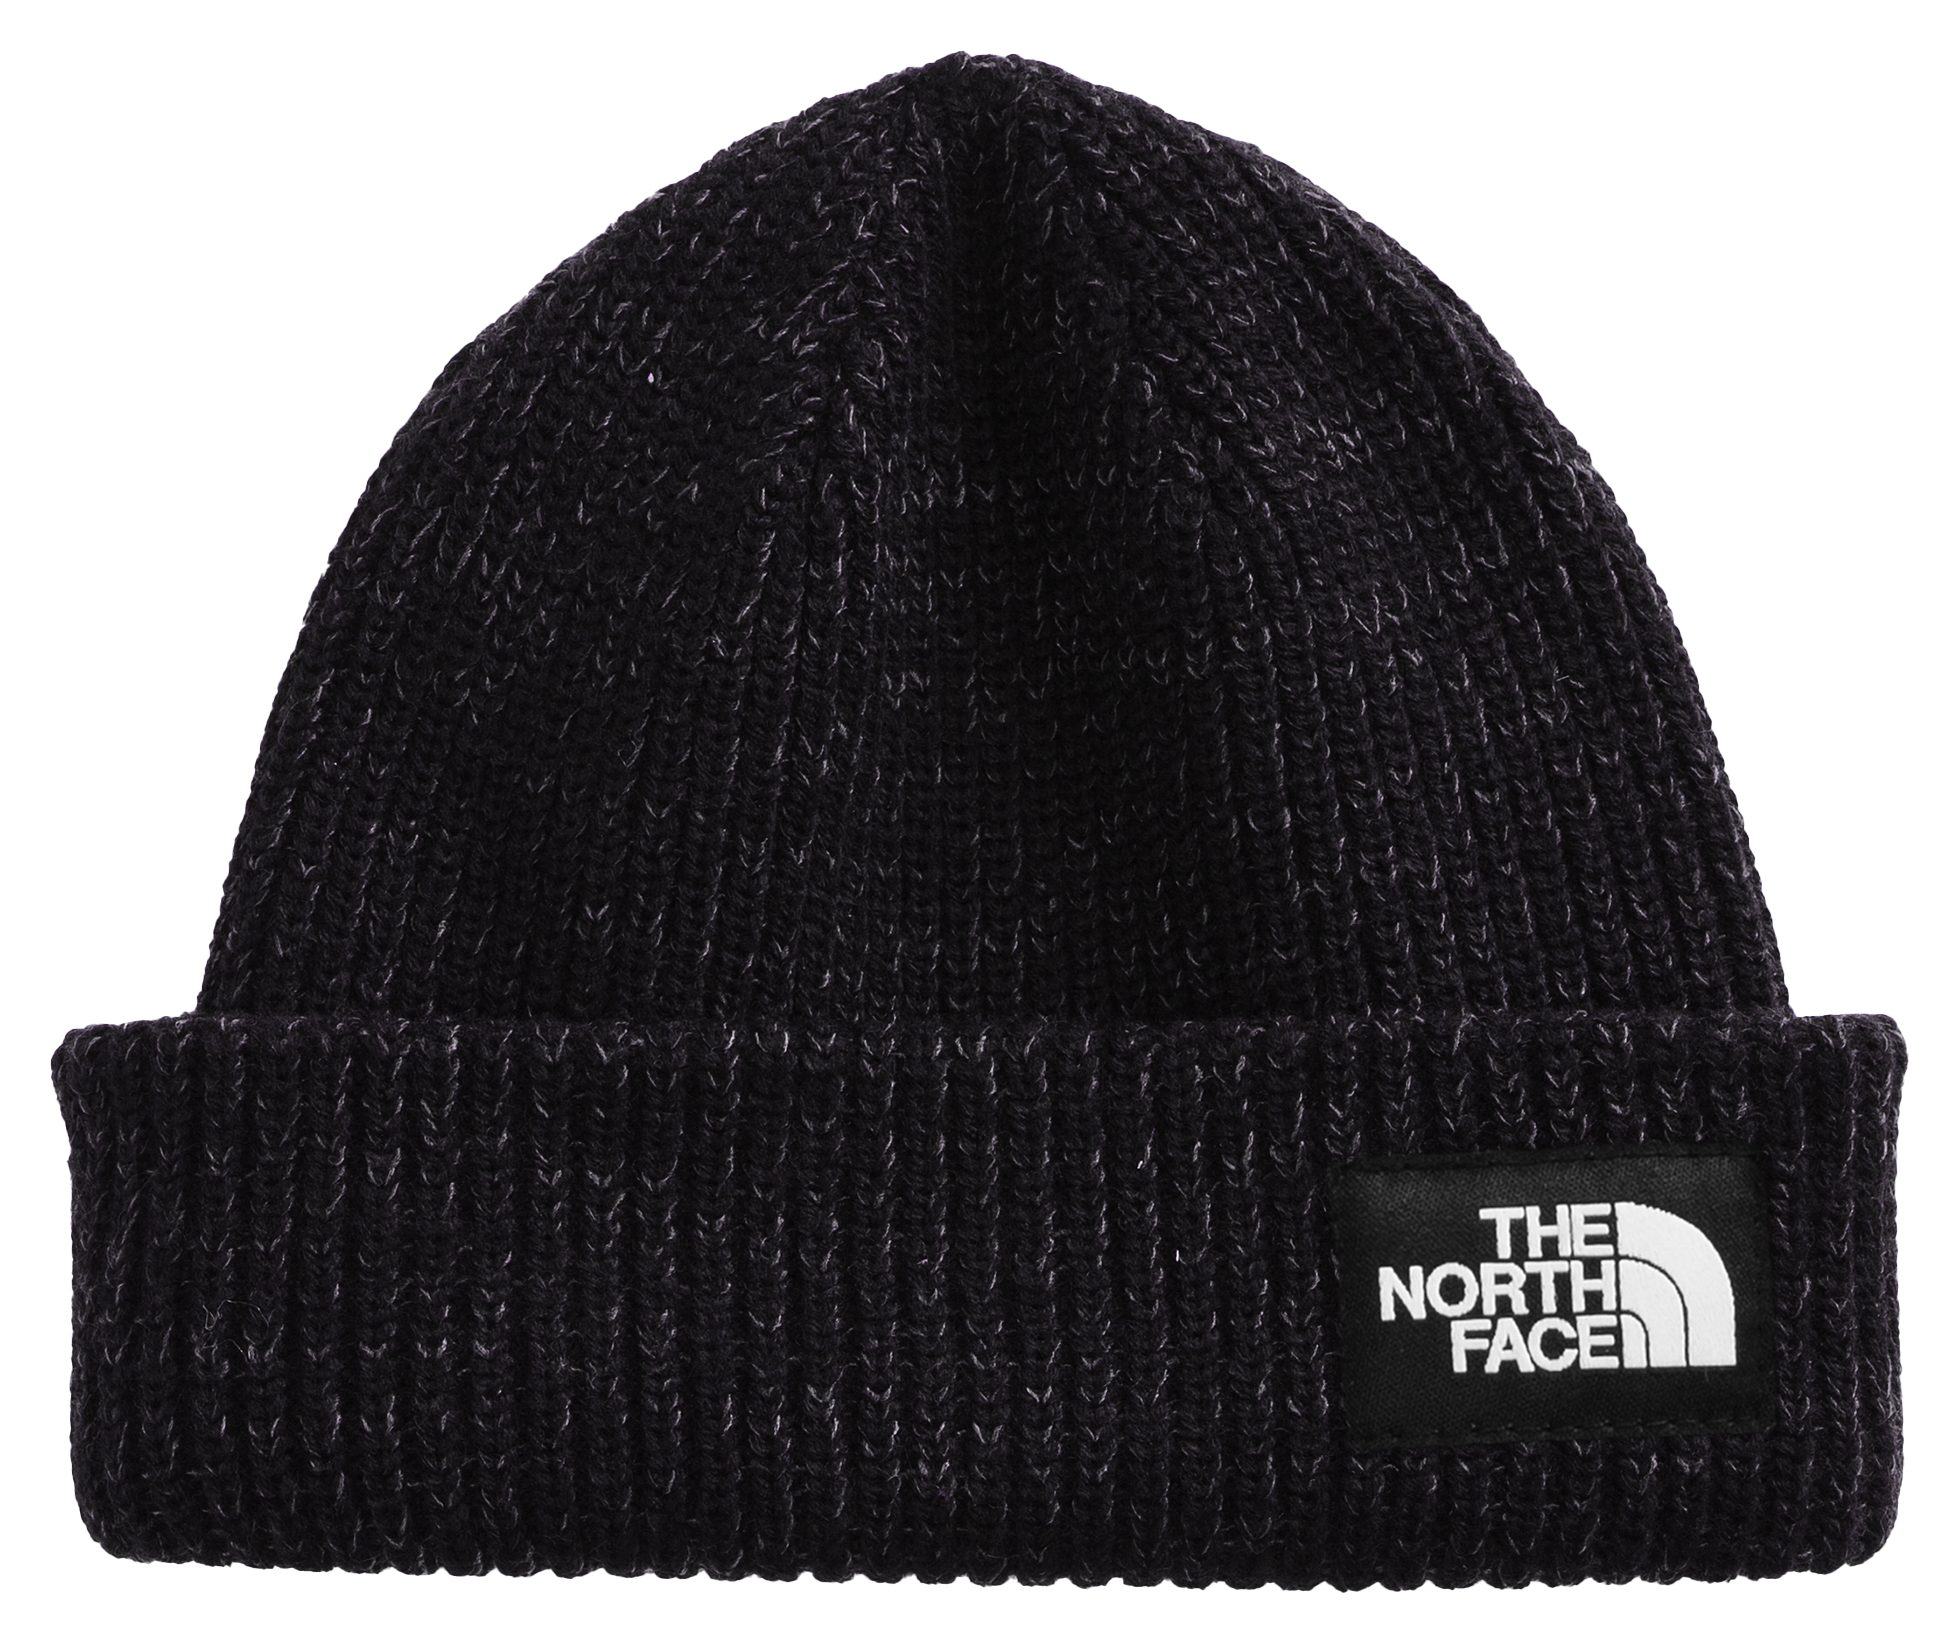 The North Face Salty Beanie | Bass Pro Shops